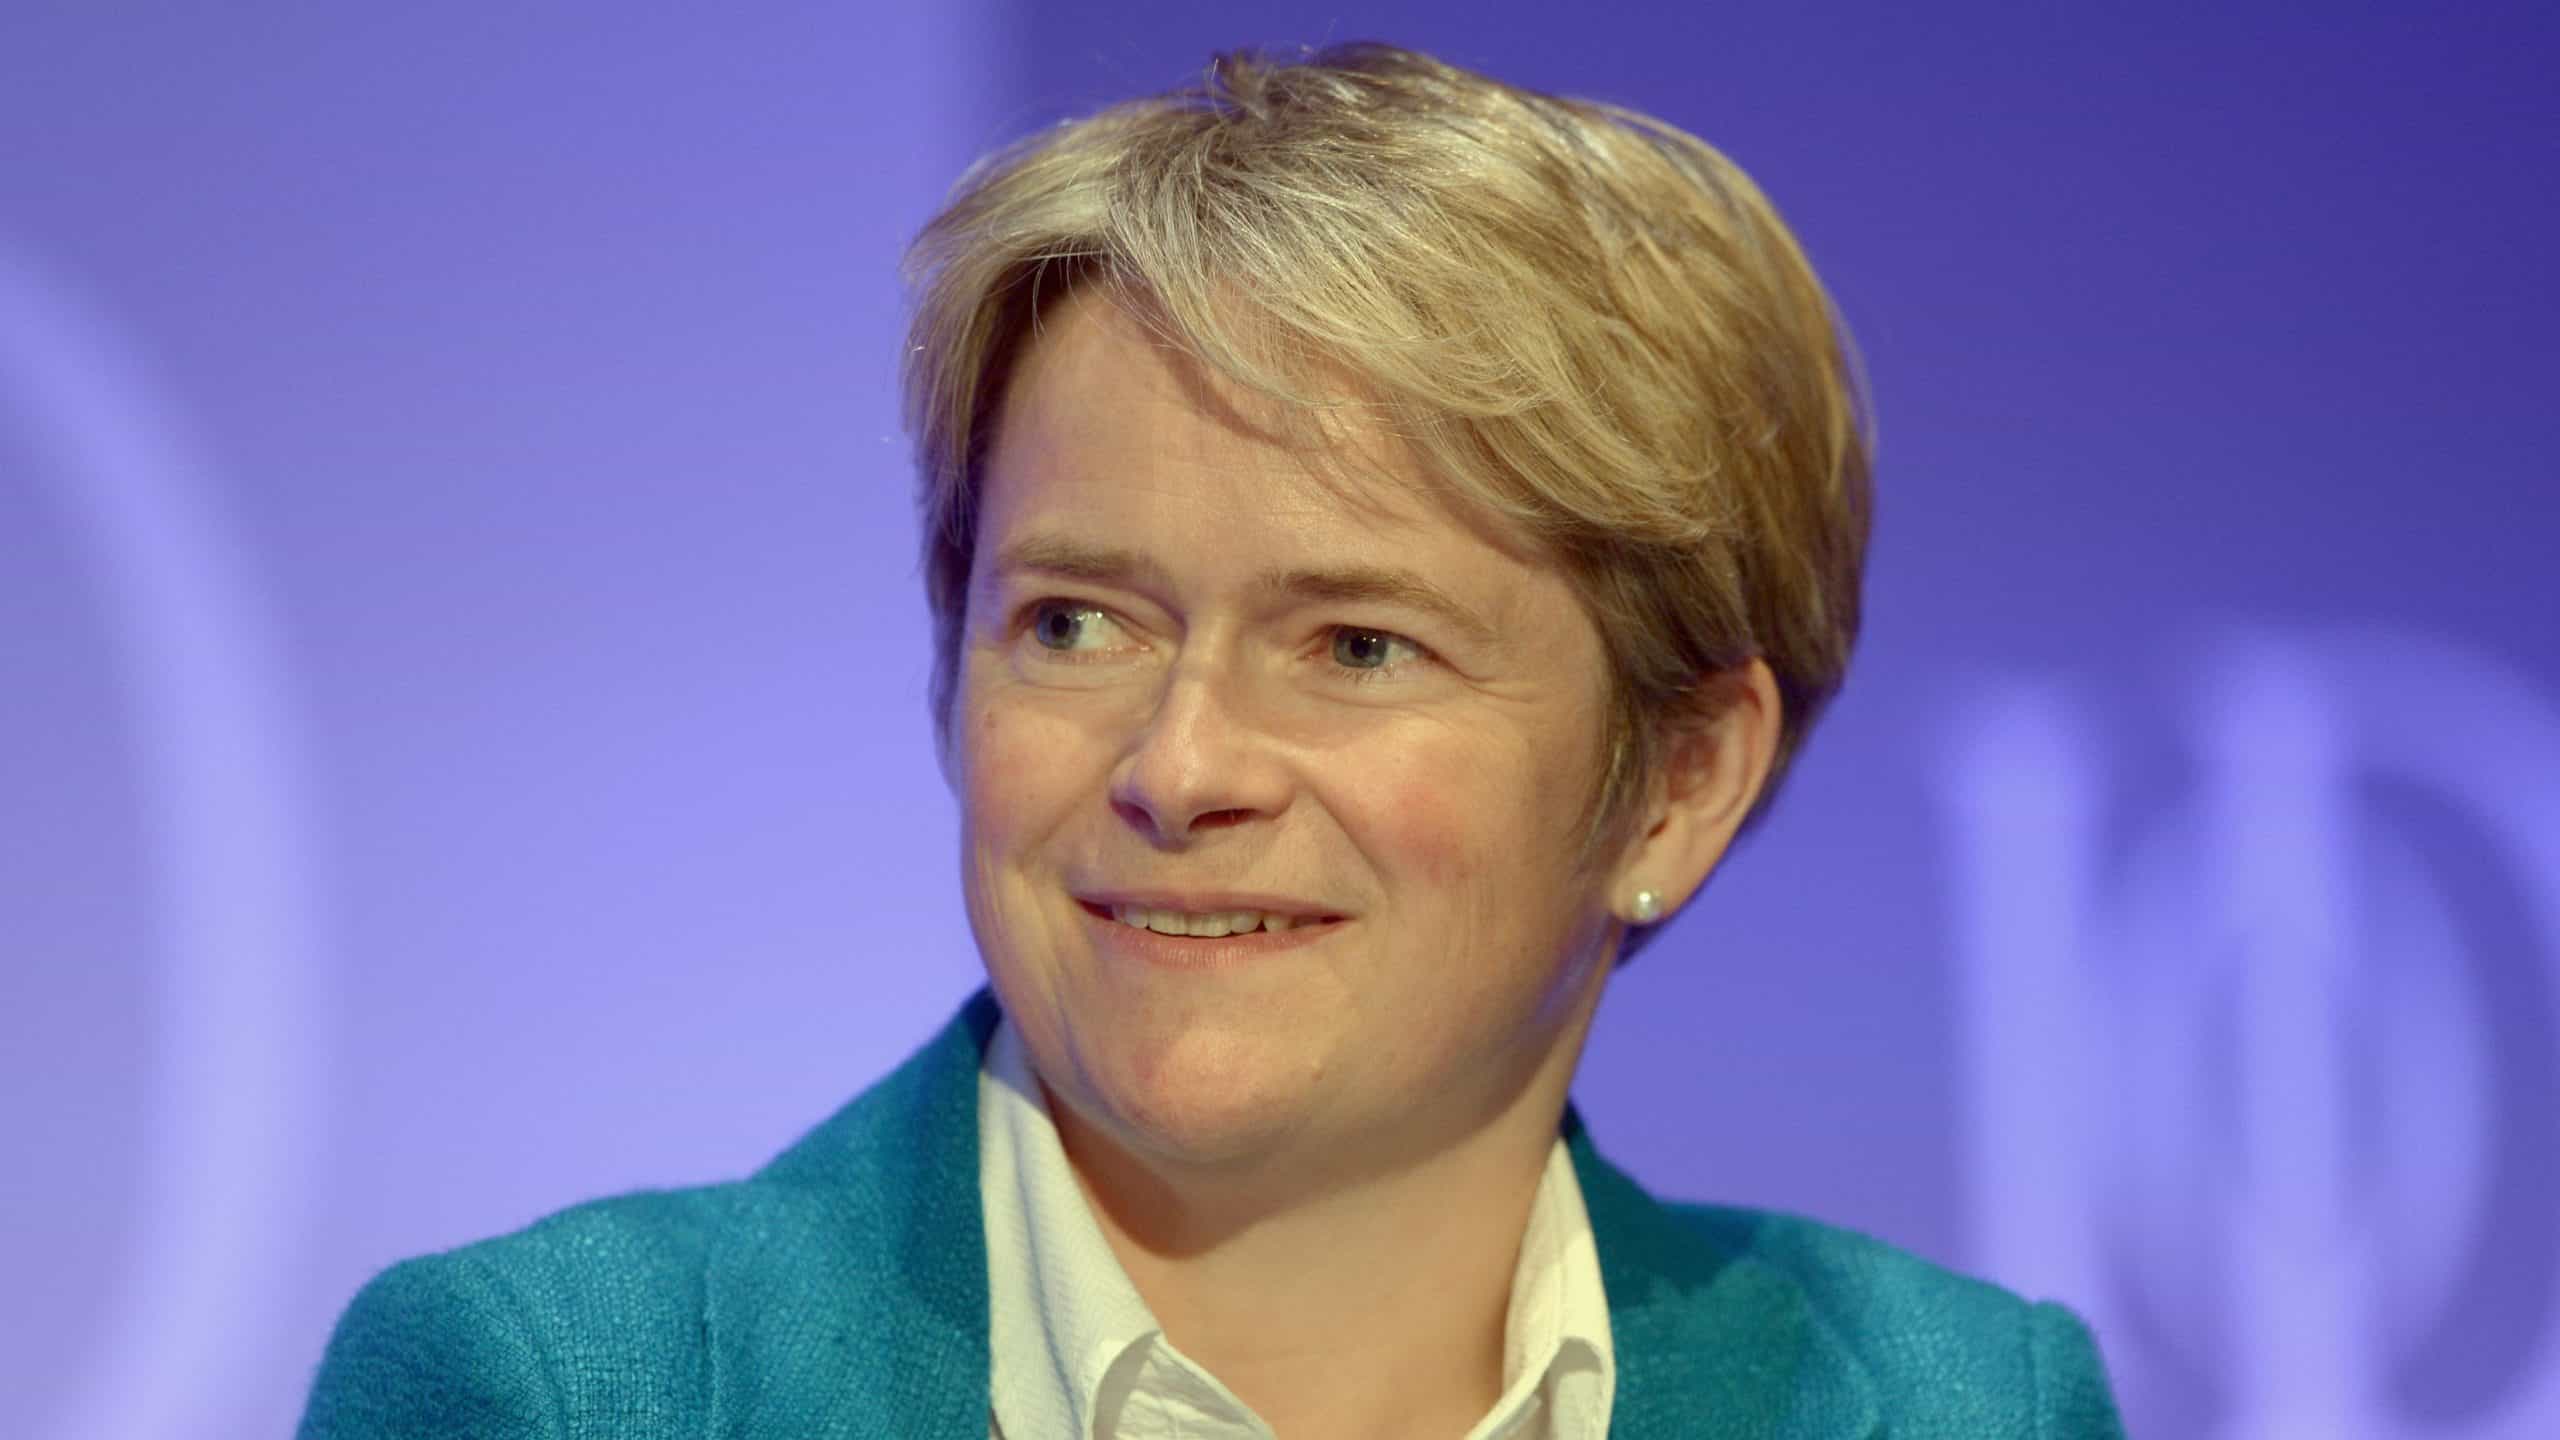 Plea to remember ‘NHS’ track & trace is ‘outsourced’ as Dido Harding insists it’s working despite missed targets